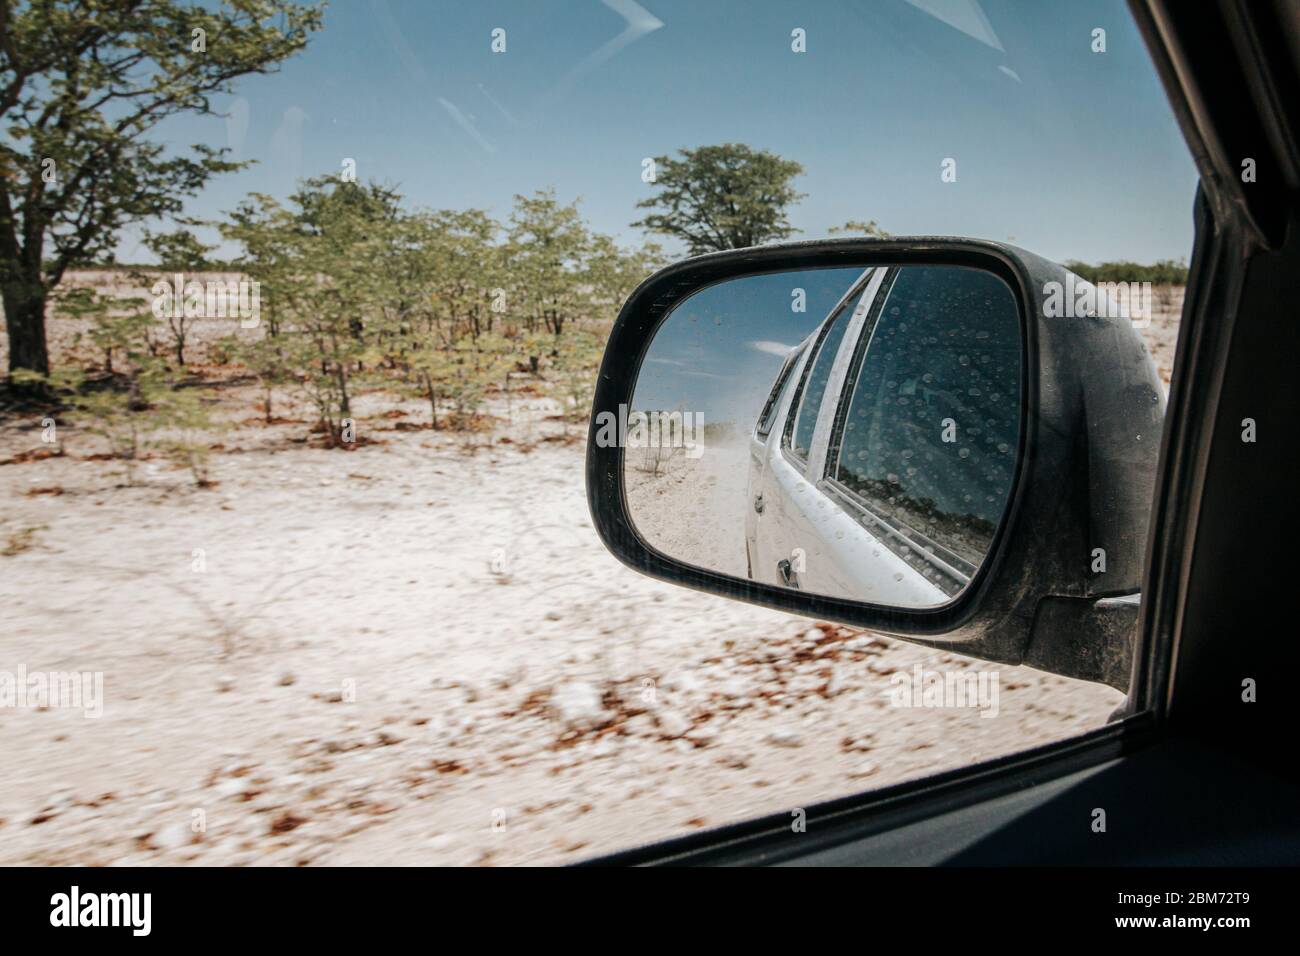 View in rear view mirror while driving through arid dry landscape in Etosha national park Namibia. Stock Photo